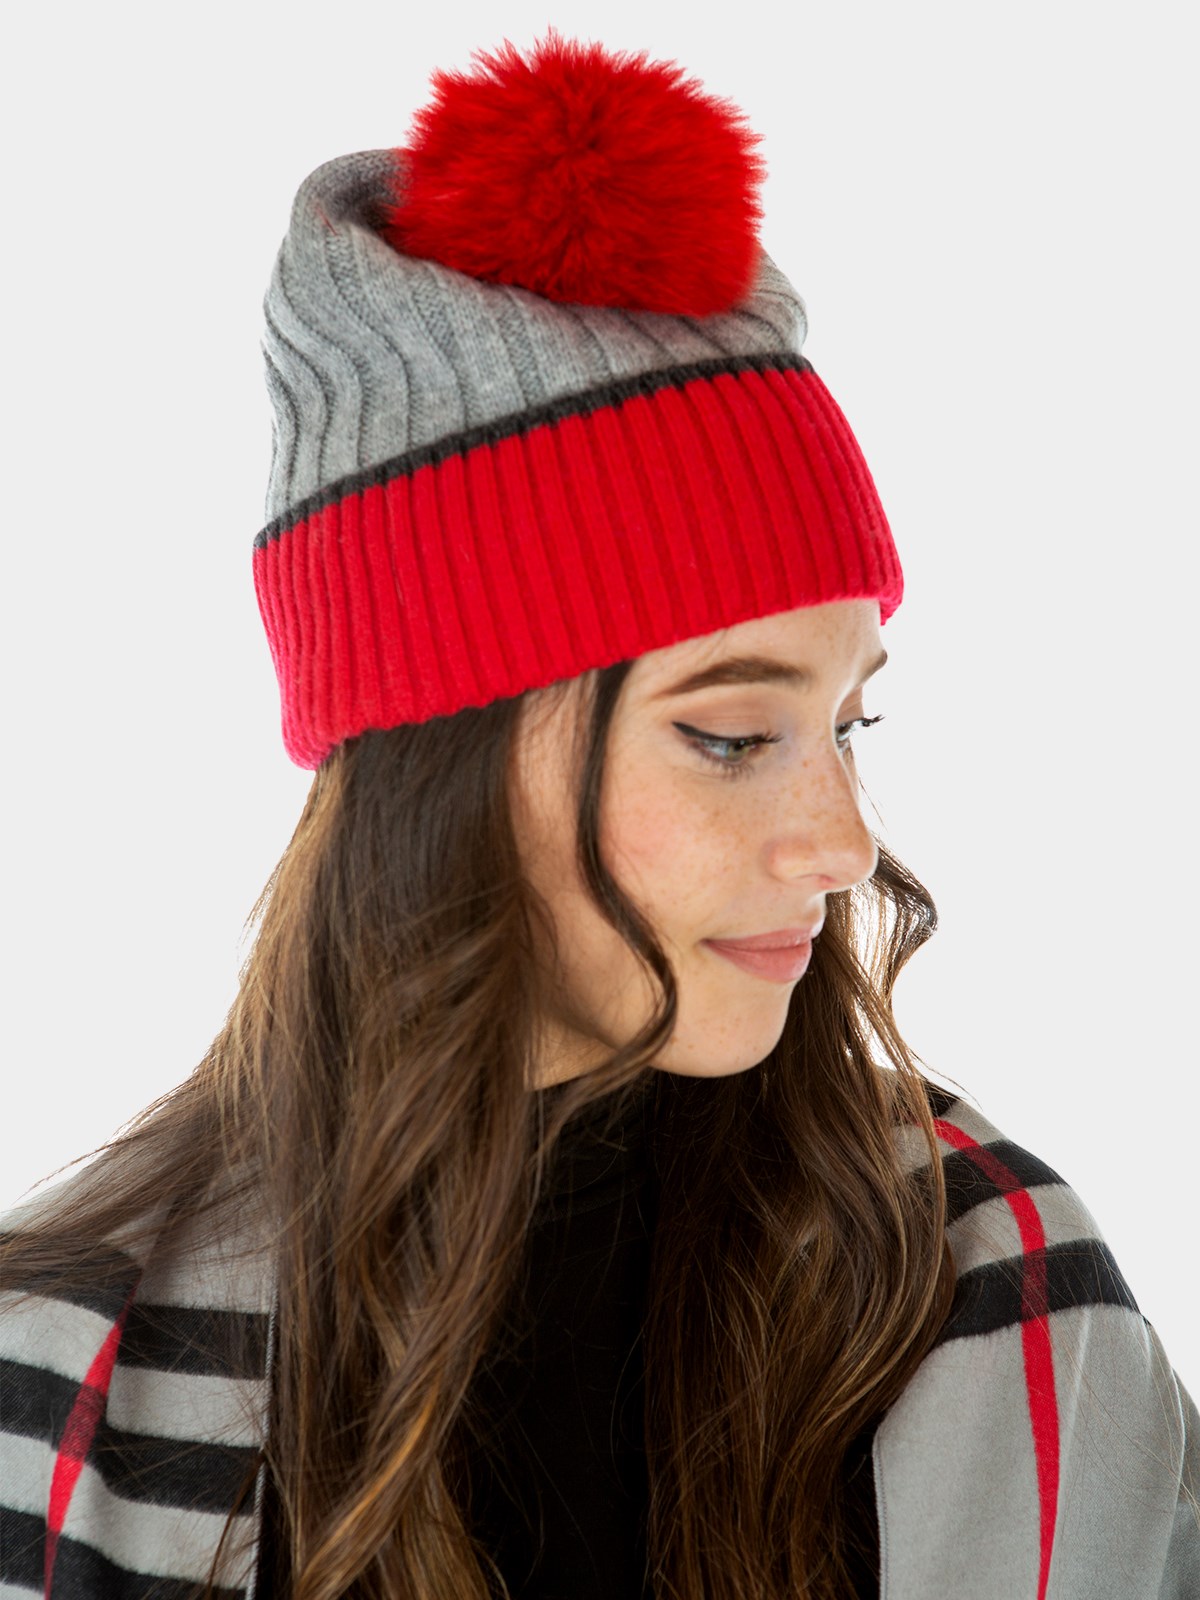 Woman's Grey Knit Fabric Hat with Red Border and Fox Fur Pom-Pom